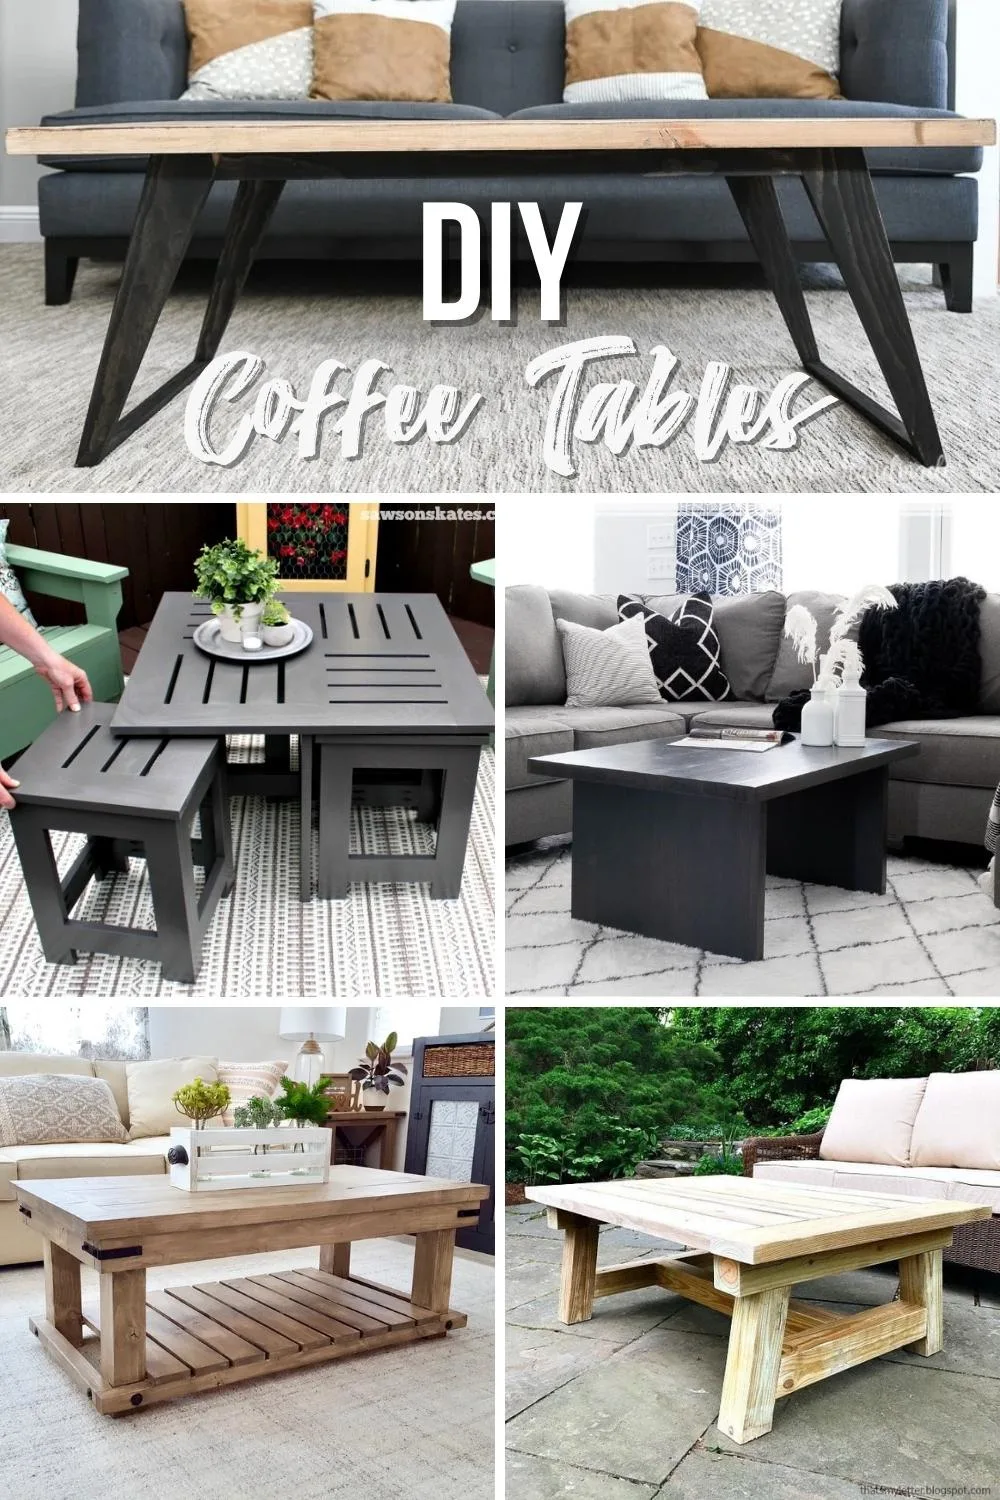 Preach Dead in the world Waste 13 Amazing DIY Coffee Table Ideas with Plans - The Handyman's Daughter